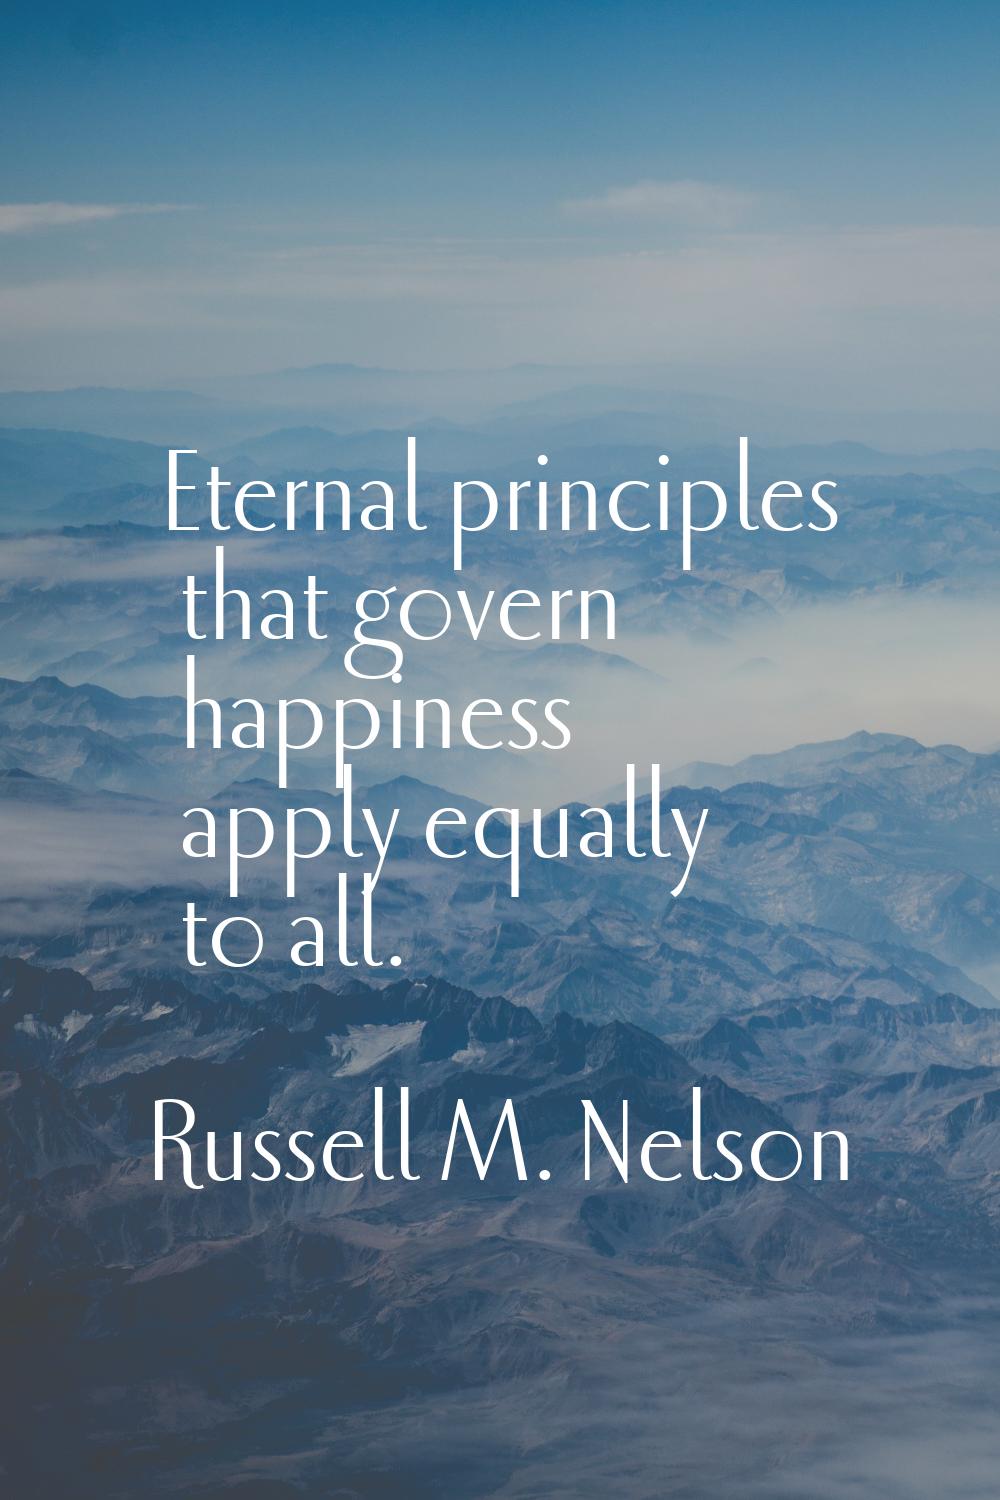 Eternal principles that govern happiness apply equally to all.